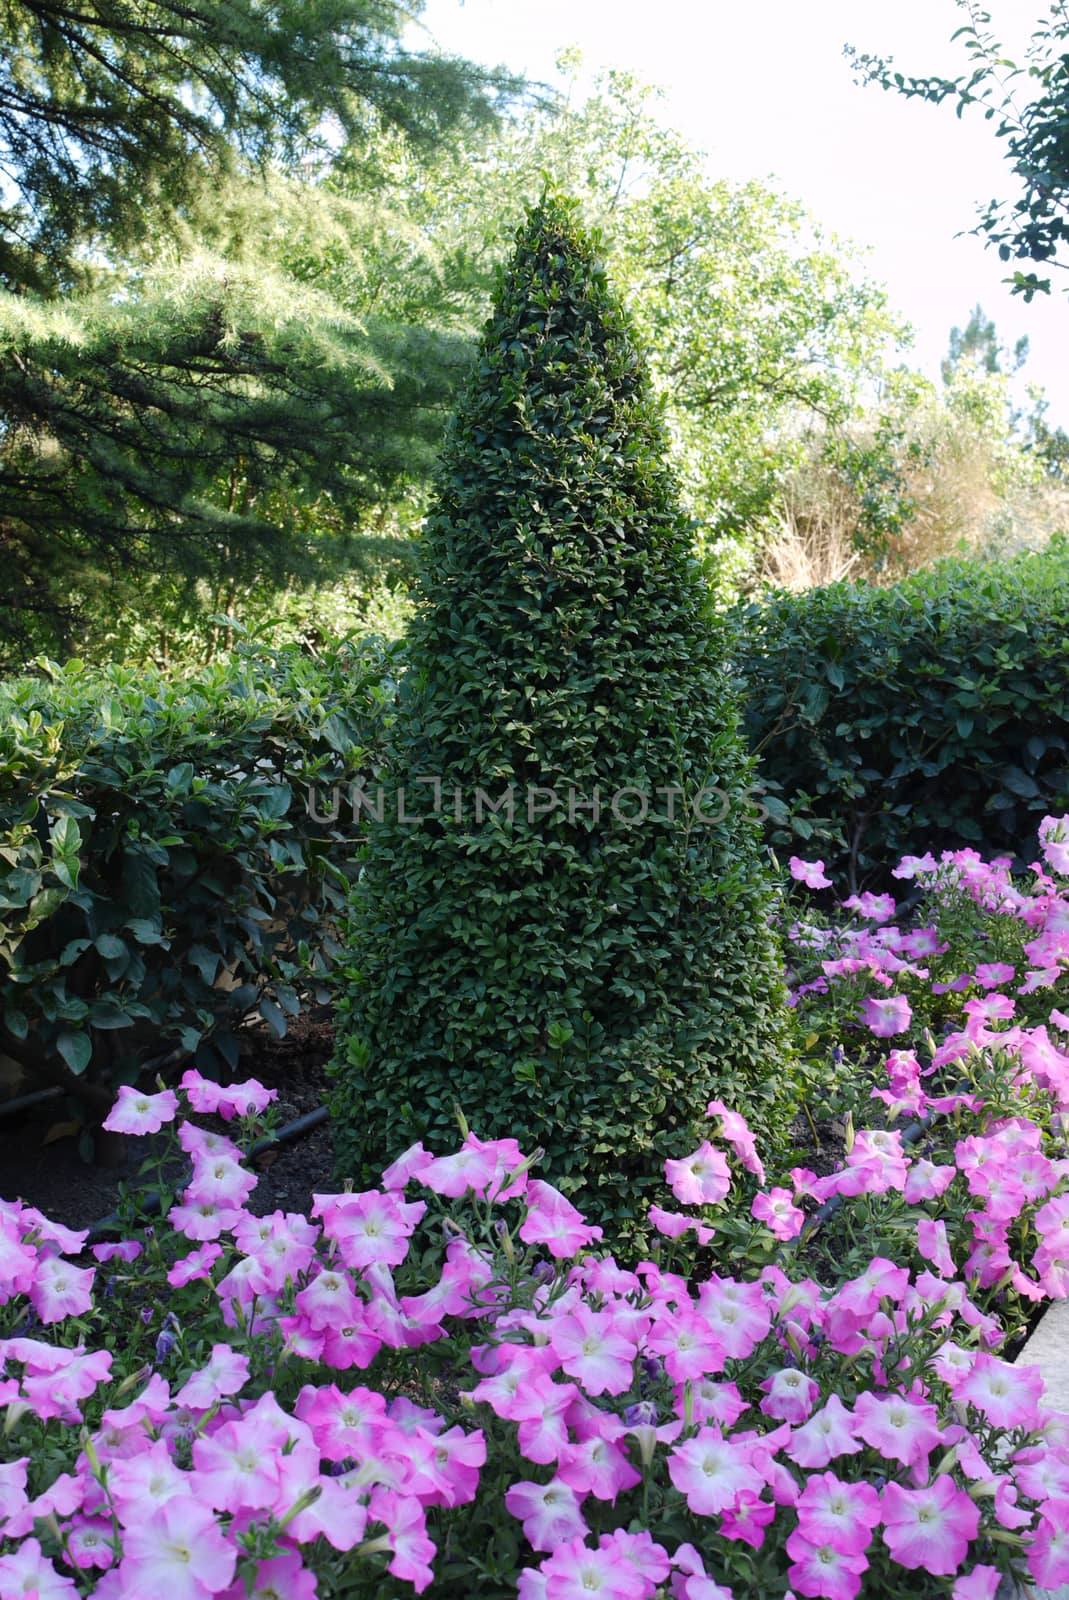 A tall ornately trimmed green bush with flower beds with small pink flowers